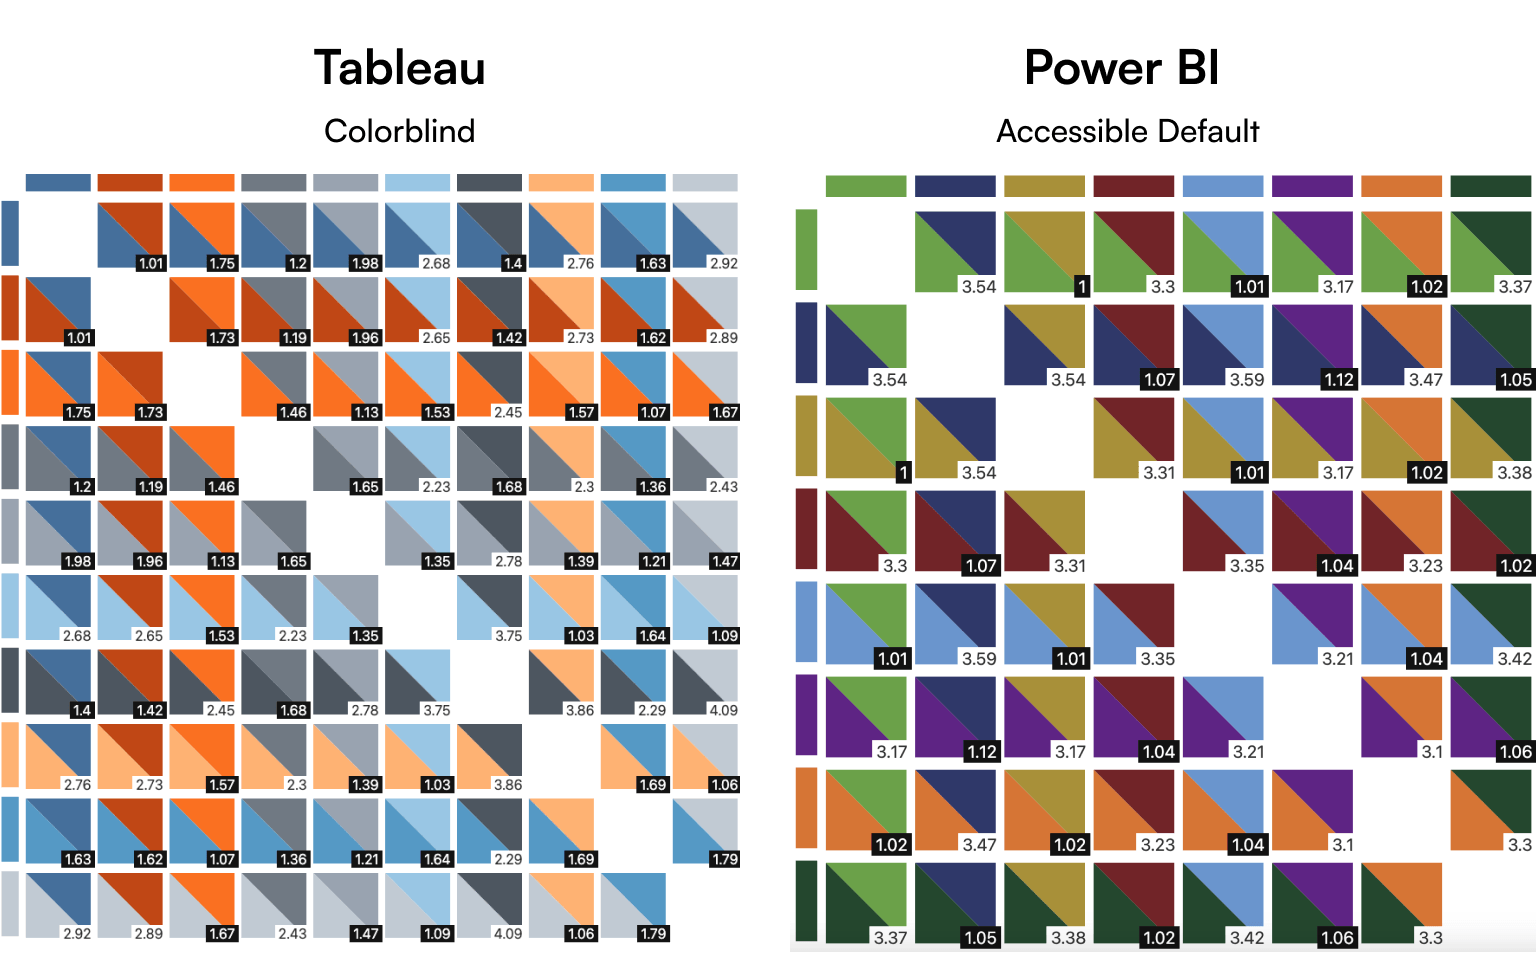 Ten colors from Tableau’s categorical colorblind color palette and eight colors from Power BI’s categorical color palette are tested with a contrast checker tool. All the color combinations are shown next to each other. In both tools, there are some combinations that pass the 3:1 ratio, but quite a lot fail even a lowered 2:1 criteria.